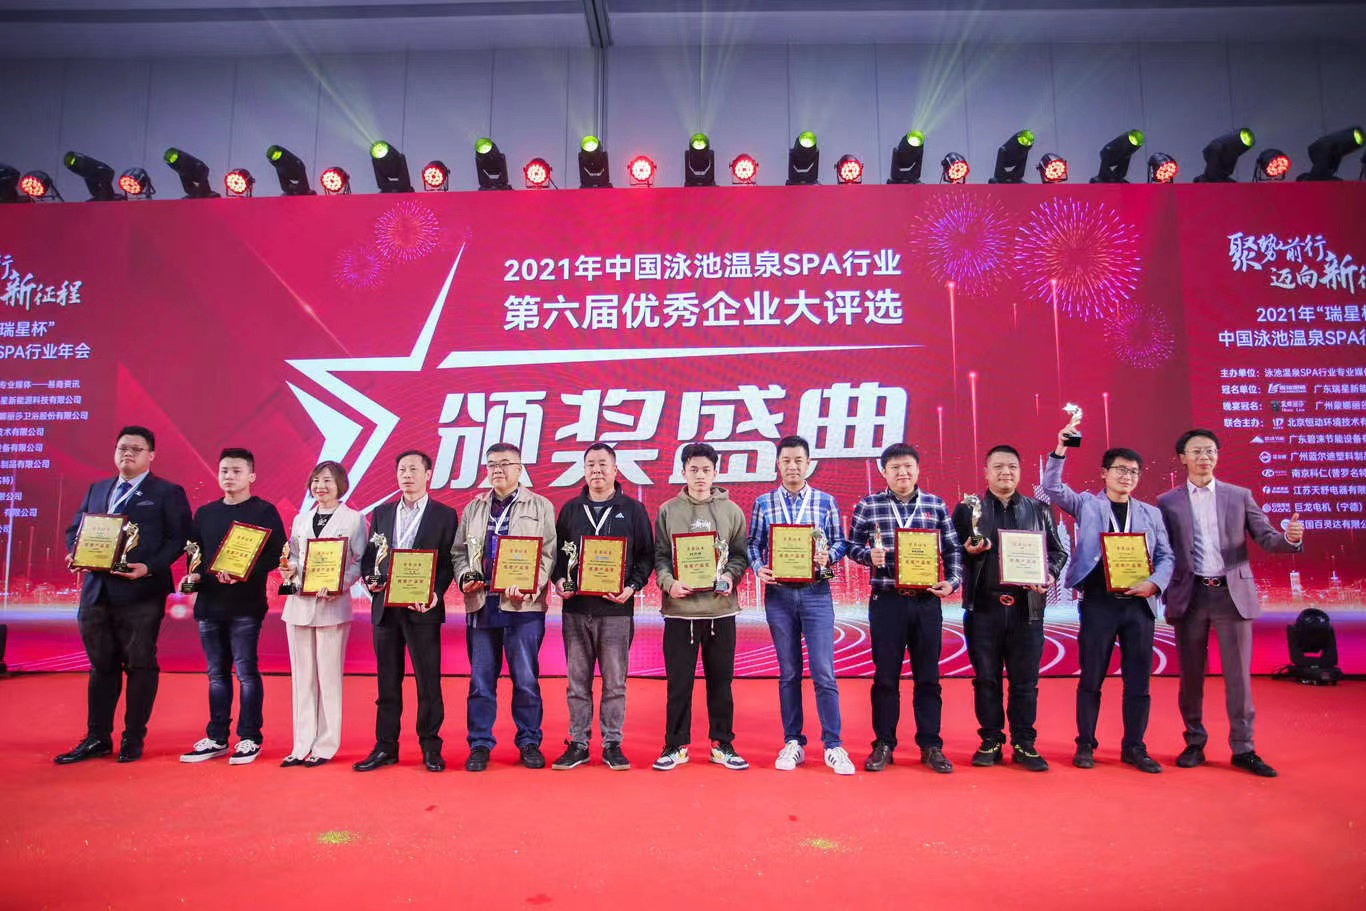 Warmly congratulate Jinlun group on winning the "high quality product award" in China's swimming pool and hot spring spa industry in 2021